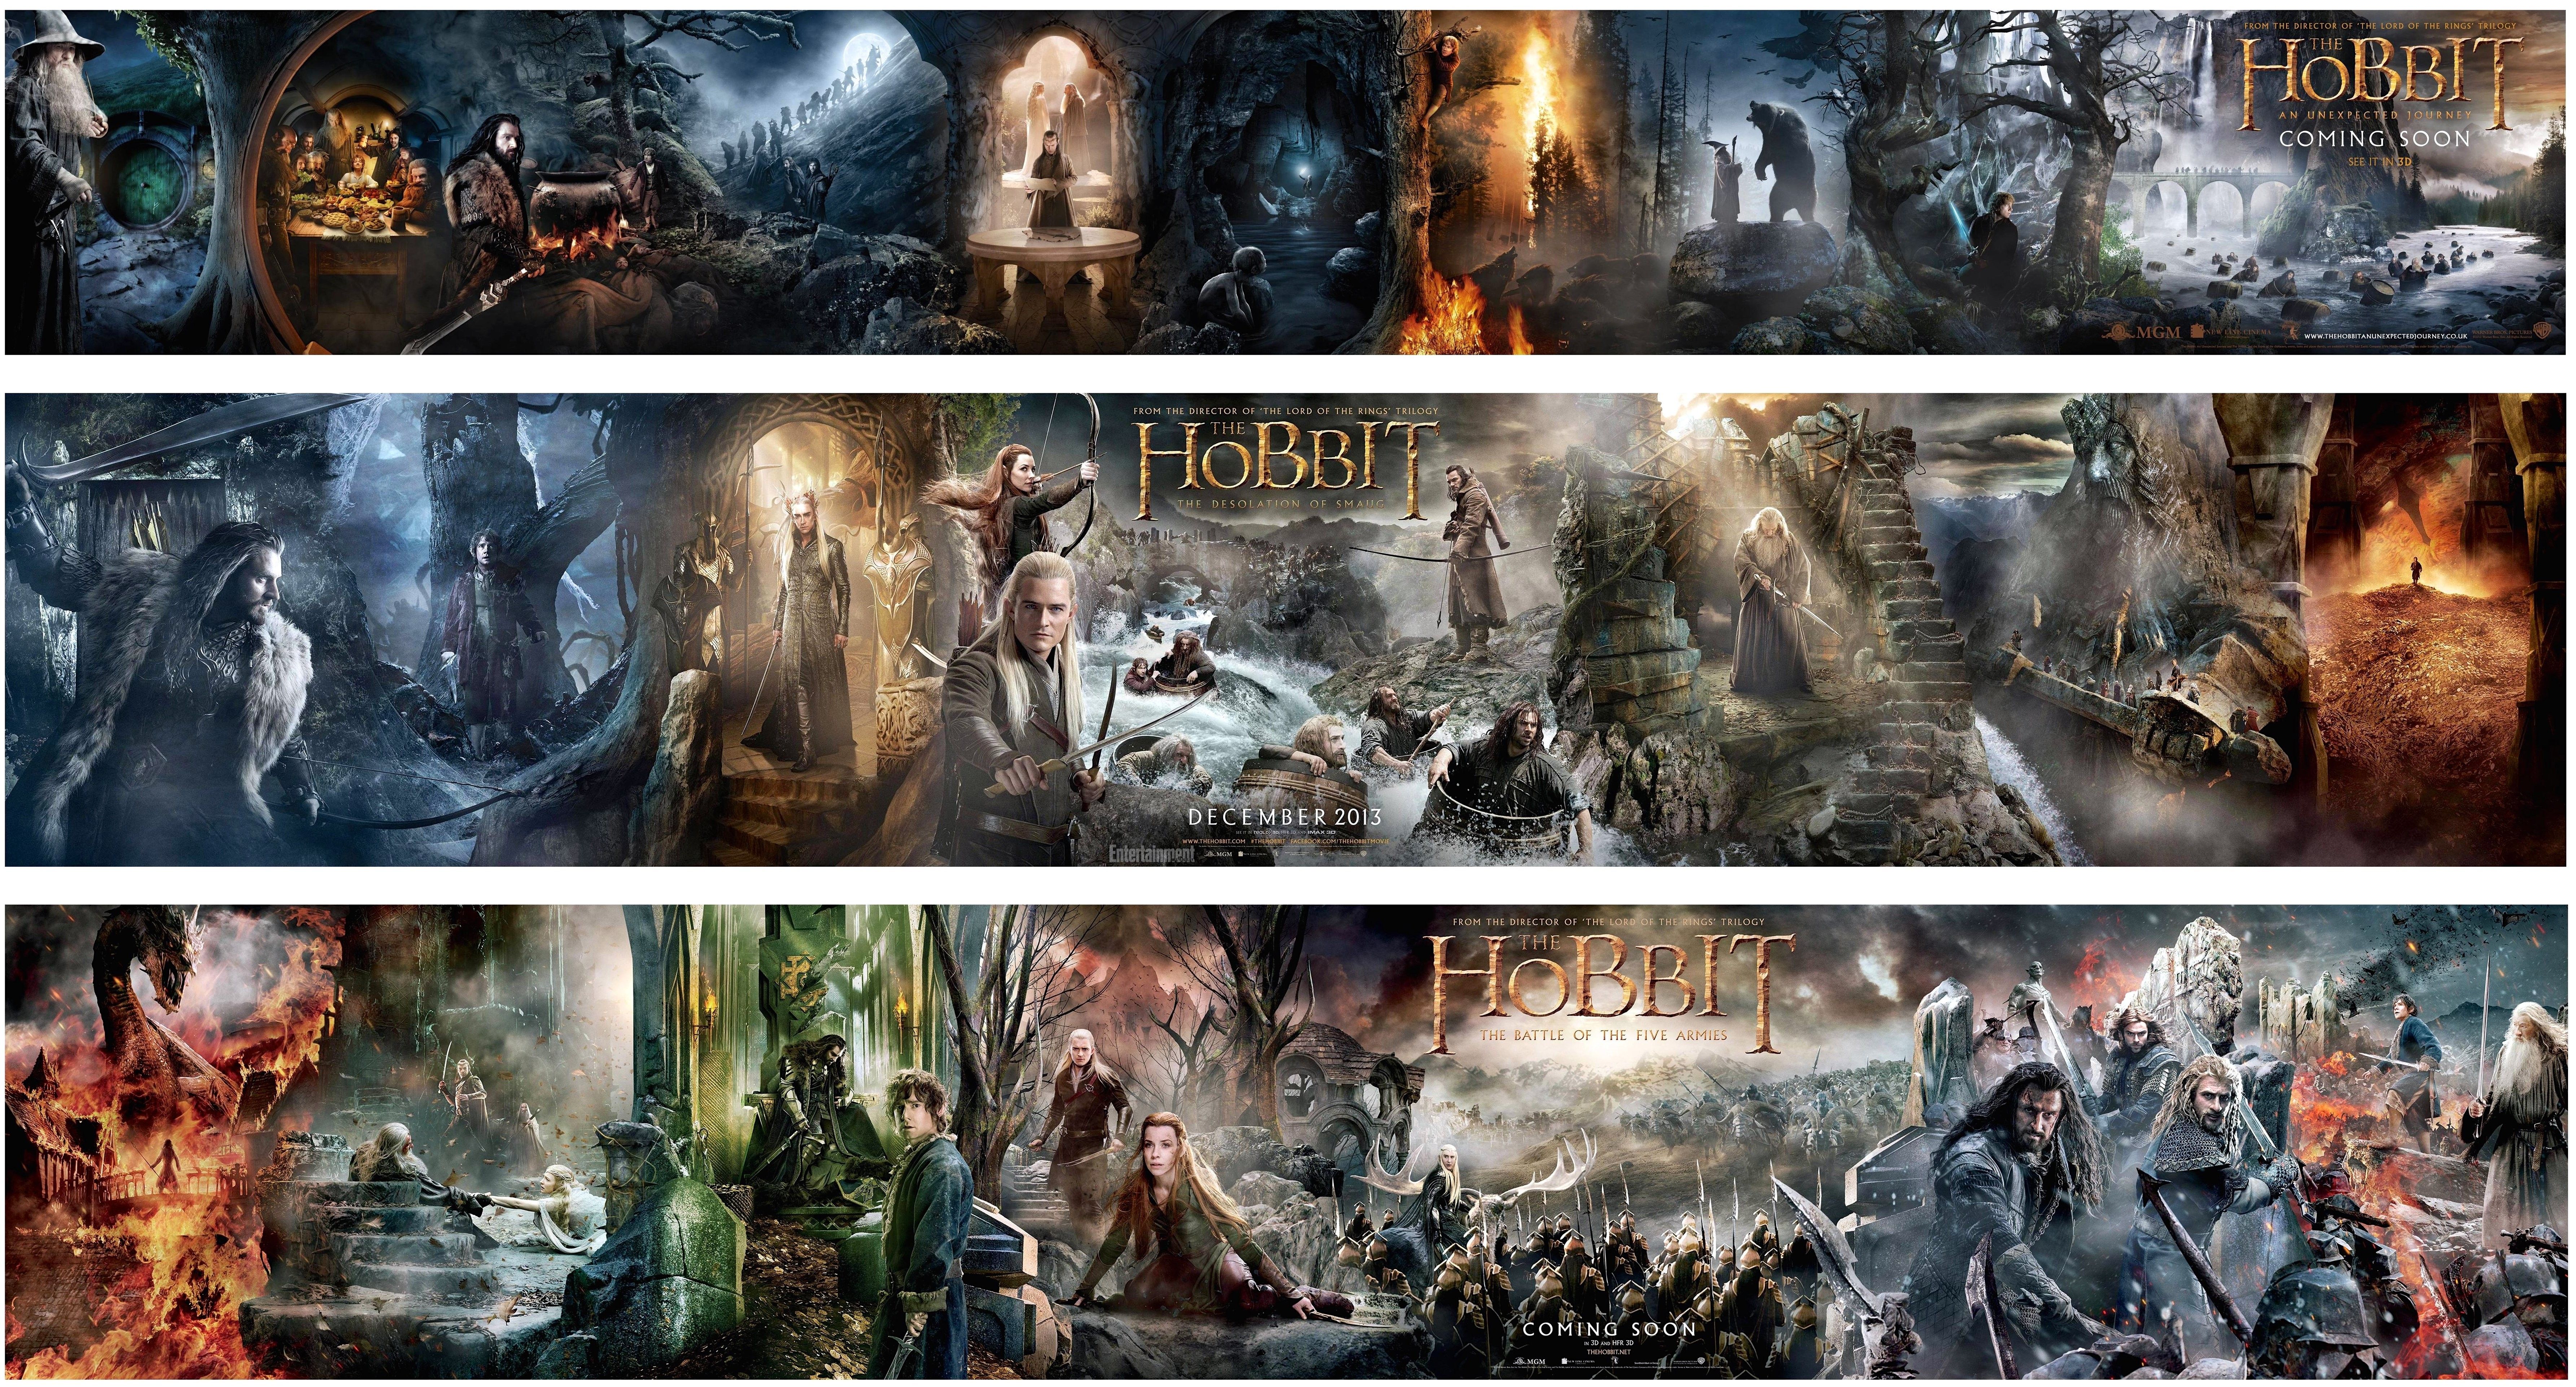 Lord, Lotr, Fantasy Wallpaper, Laptop, Armies, Battle Of The Rings Hobbit Background